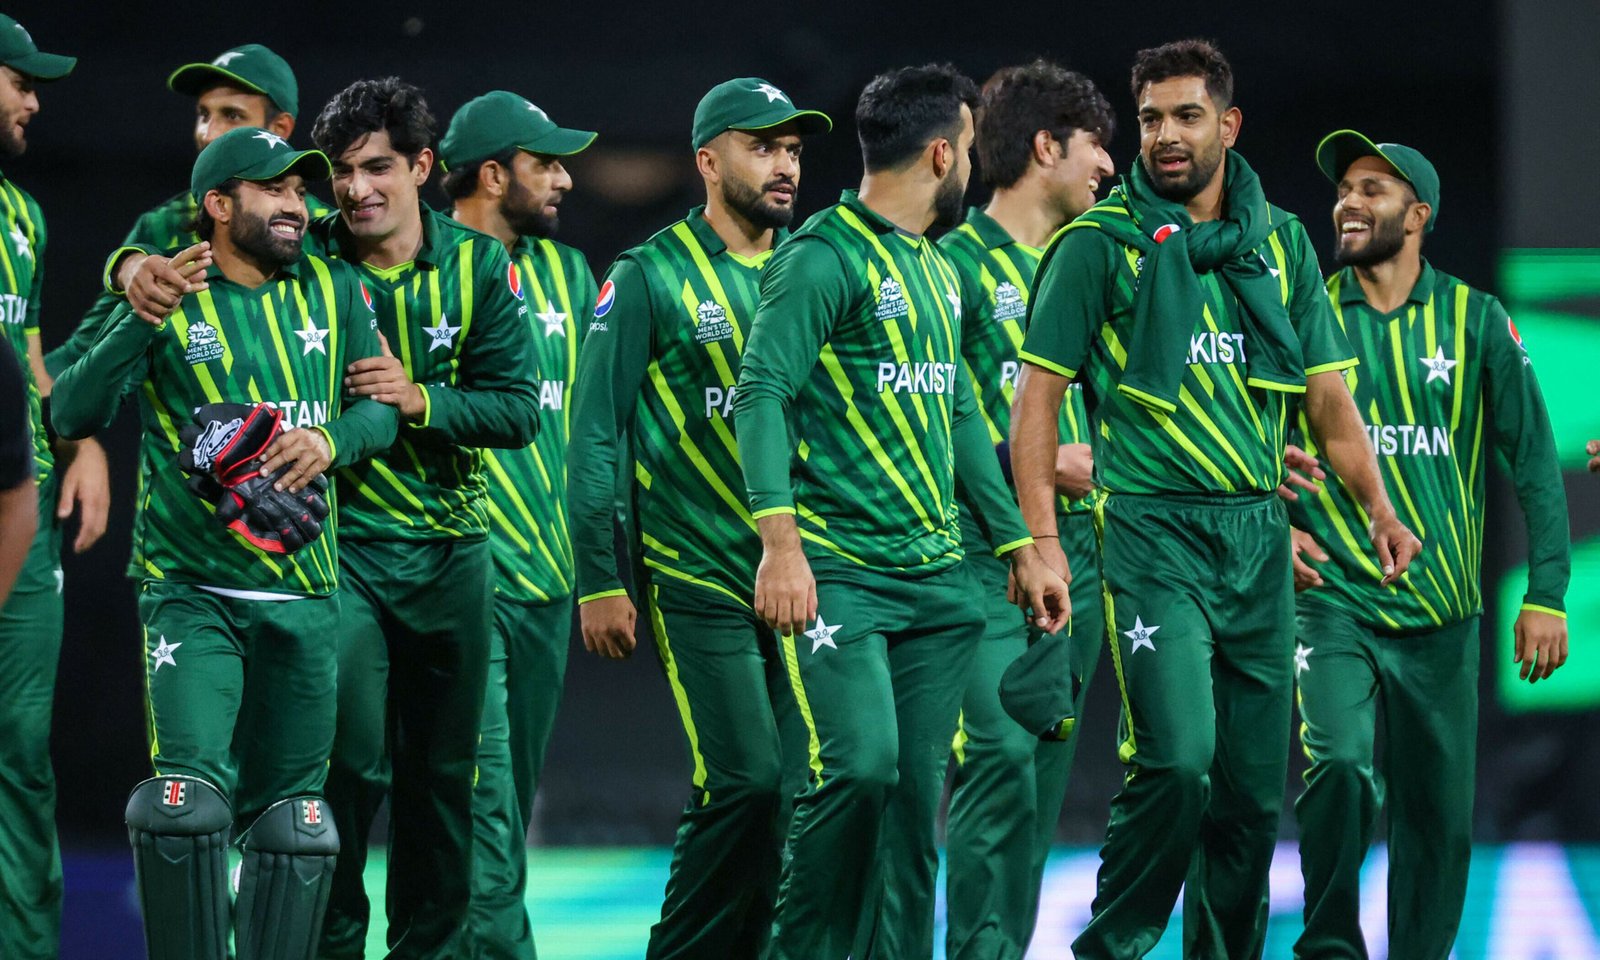 Pakistan’s T20 World Cup Journey Ends Prematurely After Rain Washes Out Match